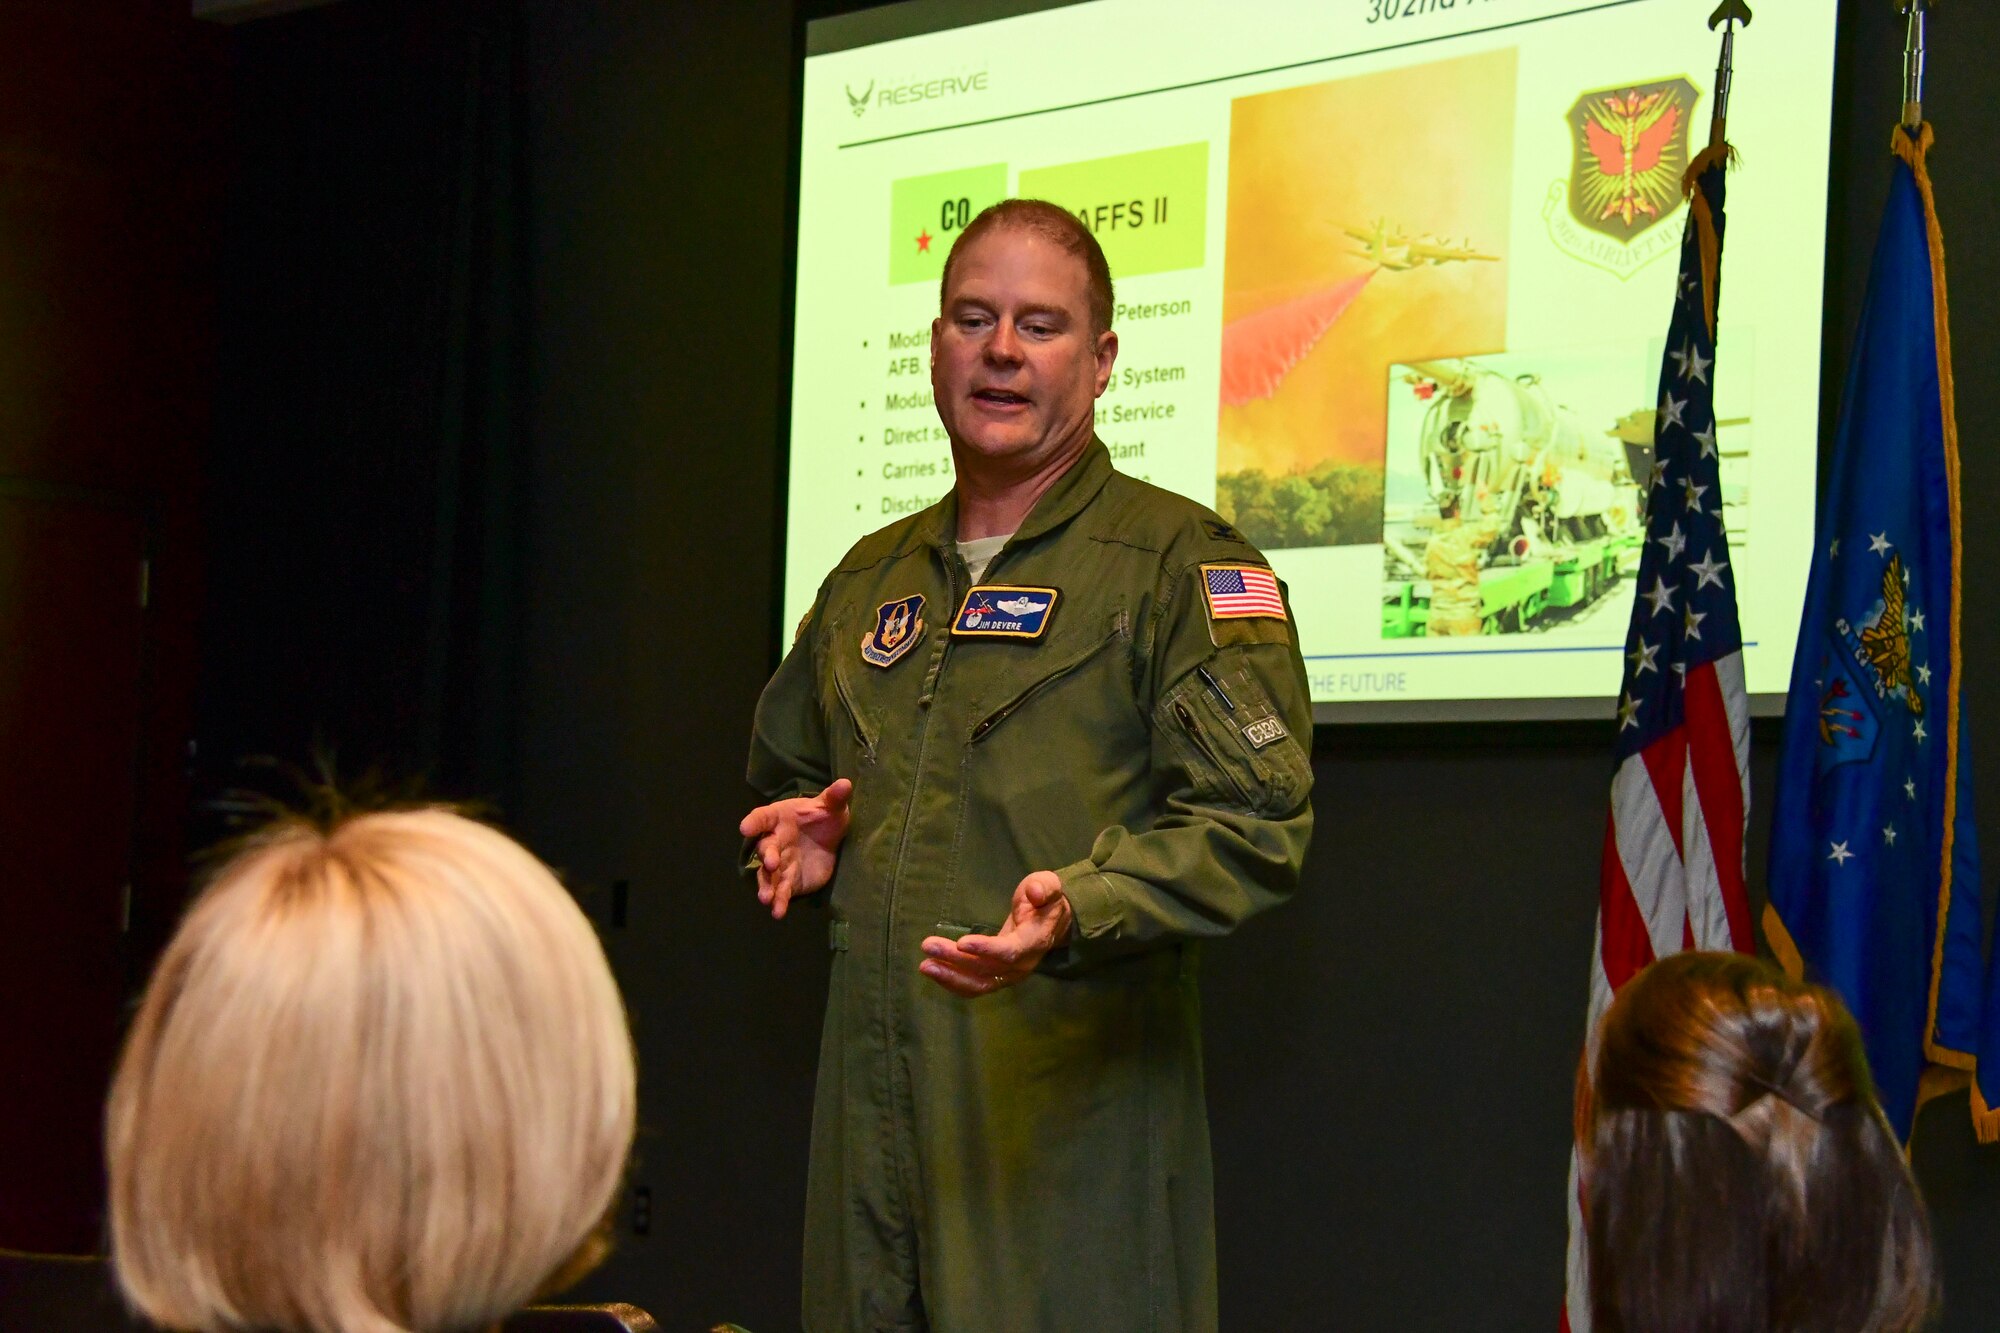 Col. James DeVere, 302nd Airlift Wing commander, gives a mission brief during the 22nd Air Force Senior Leader Summit held in August 2018. DeVere was one of several commanders who spoke during the briefing, giving attendees a better idea of the unique mission sets found throughout the 22AF. (U.S. Air Force photo/Staff Sgt. Andrew Park)